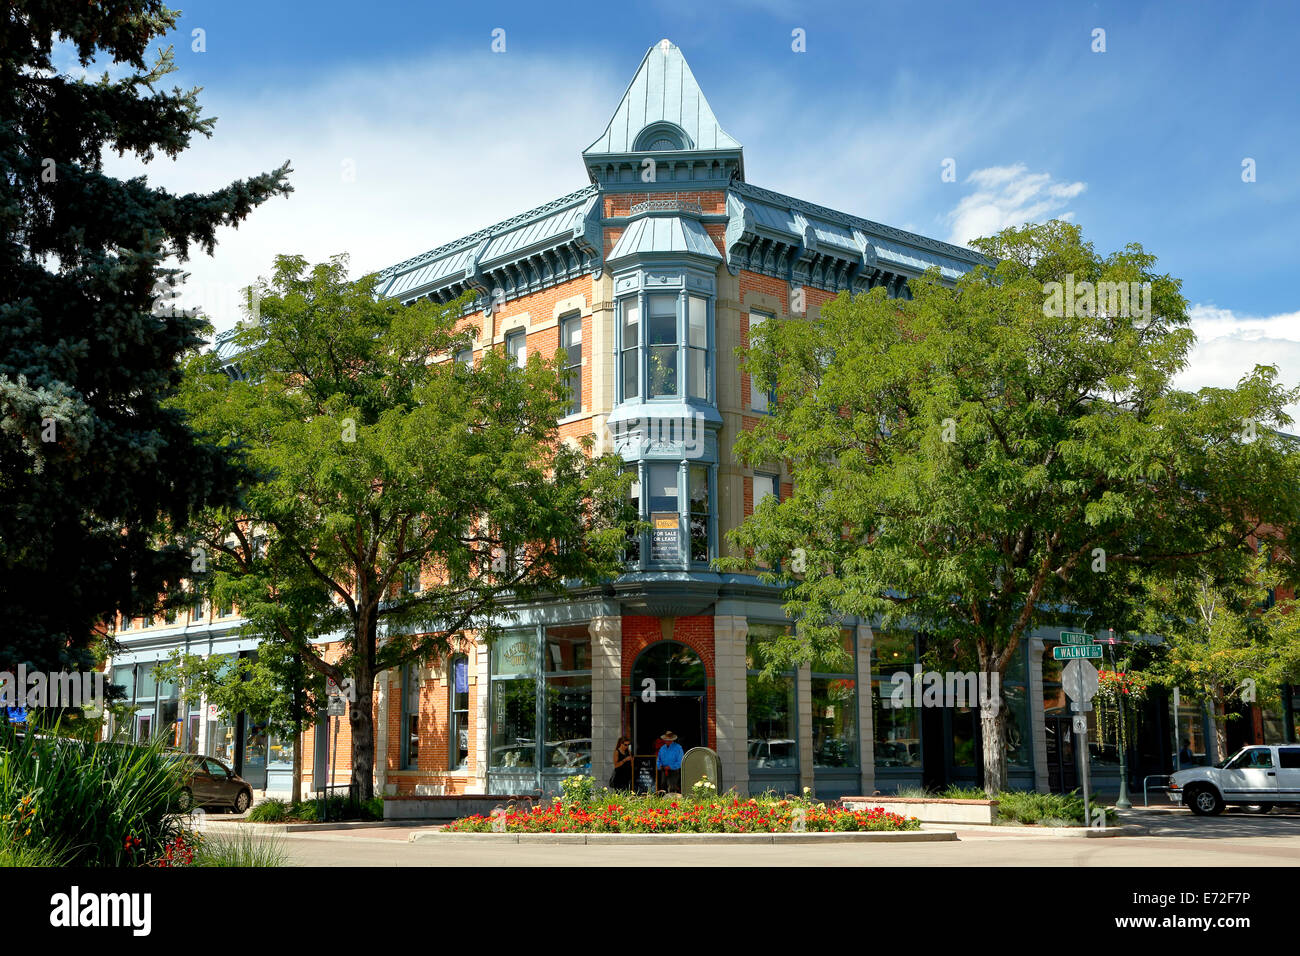 Historic Linden Hotel building, Old Town, Fort Collins, Colorado USA Stock Photo